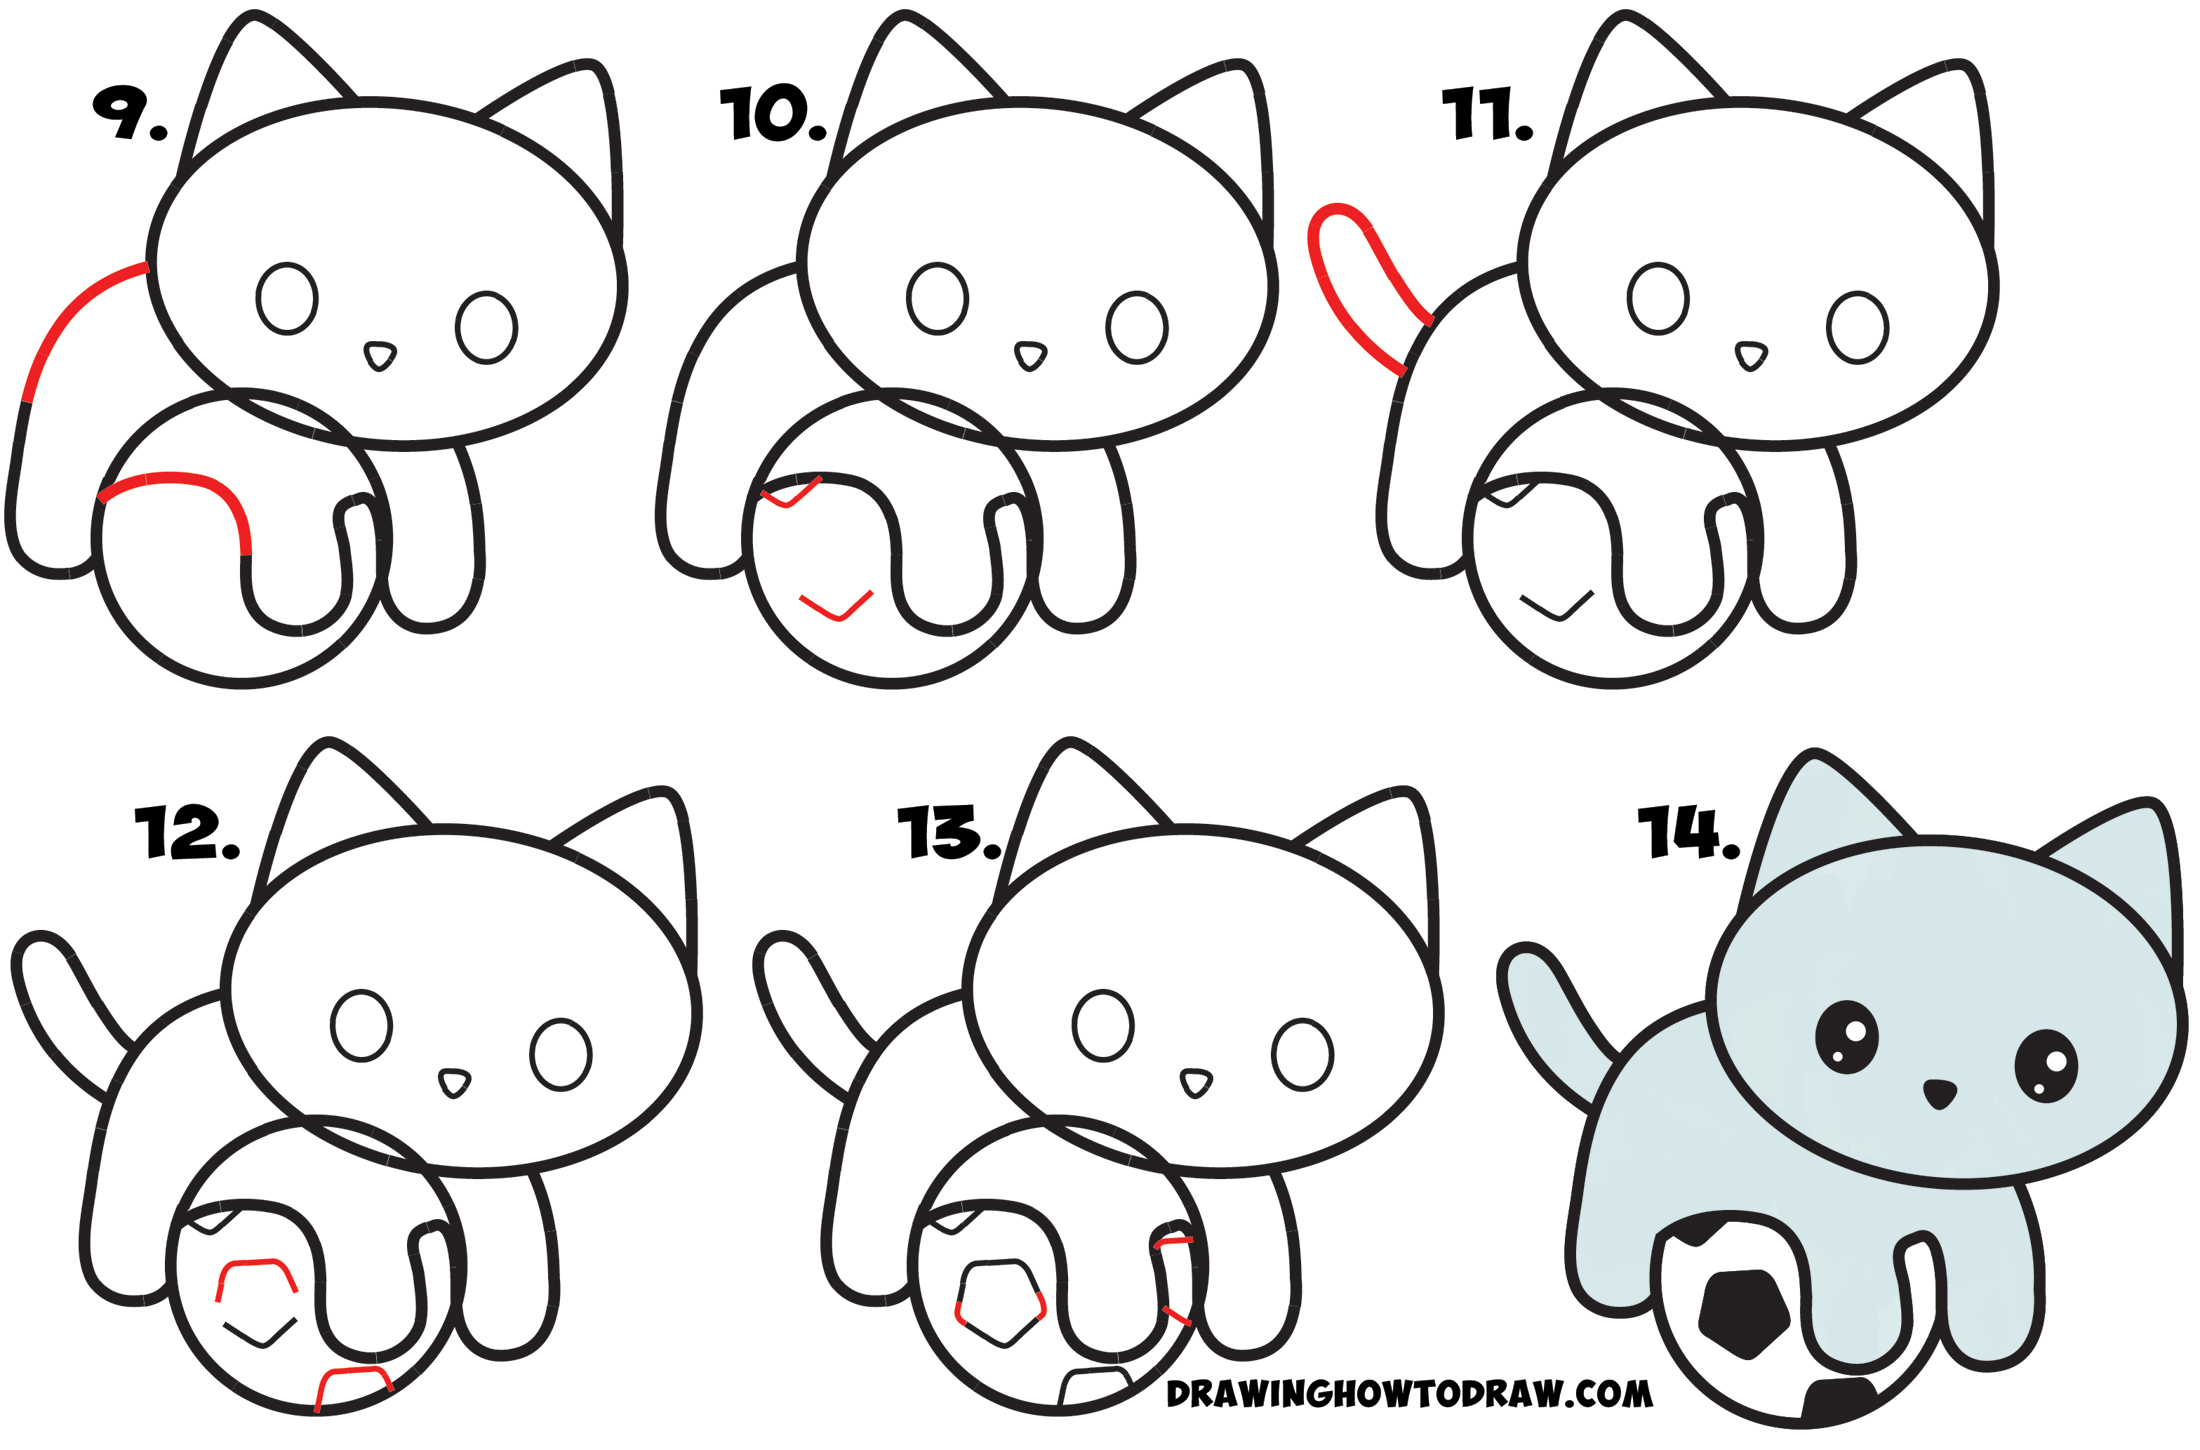 How to draw kawaii cat: easy step-by-step drawing tutorial